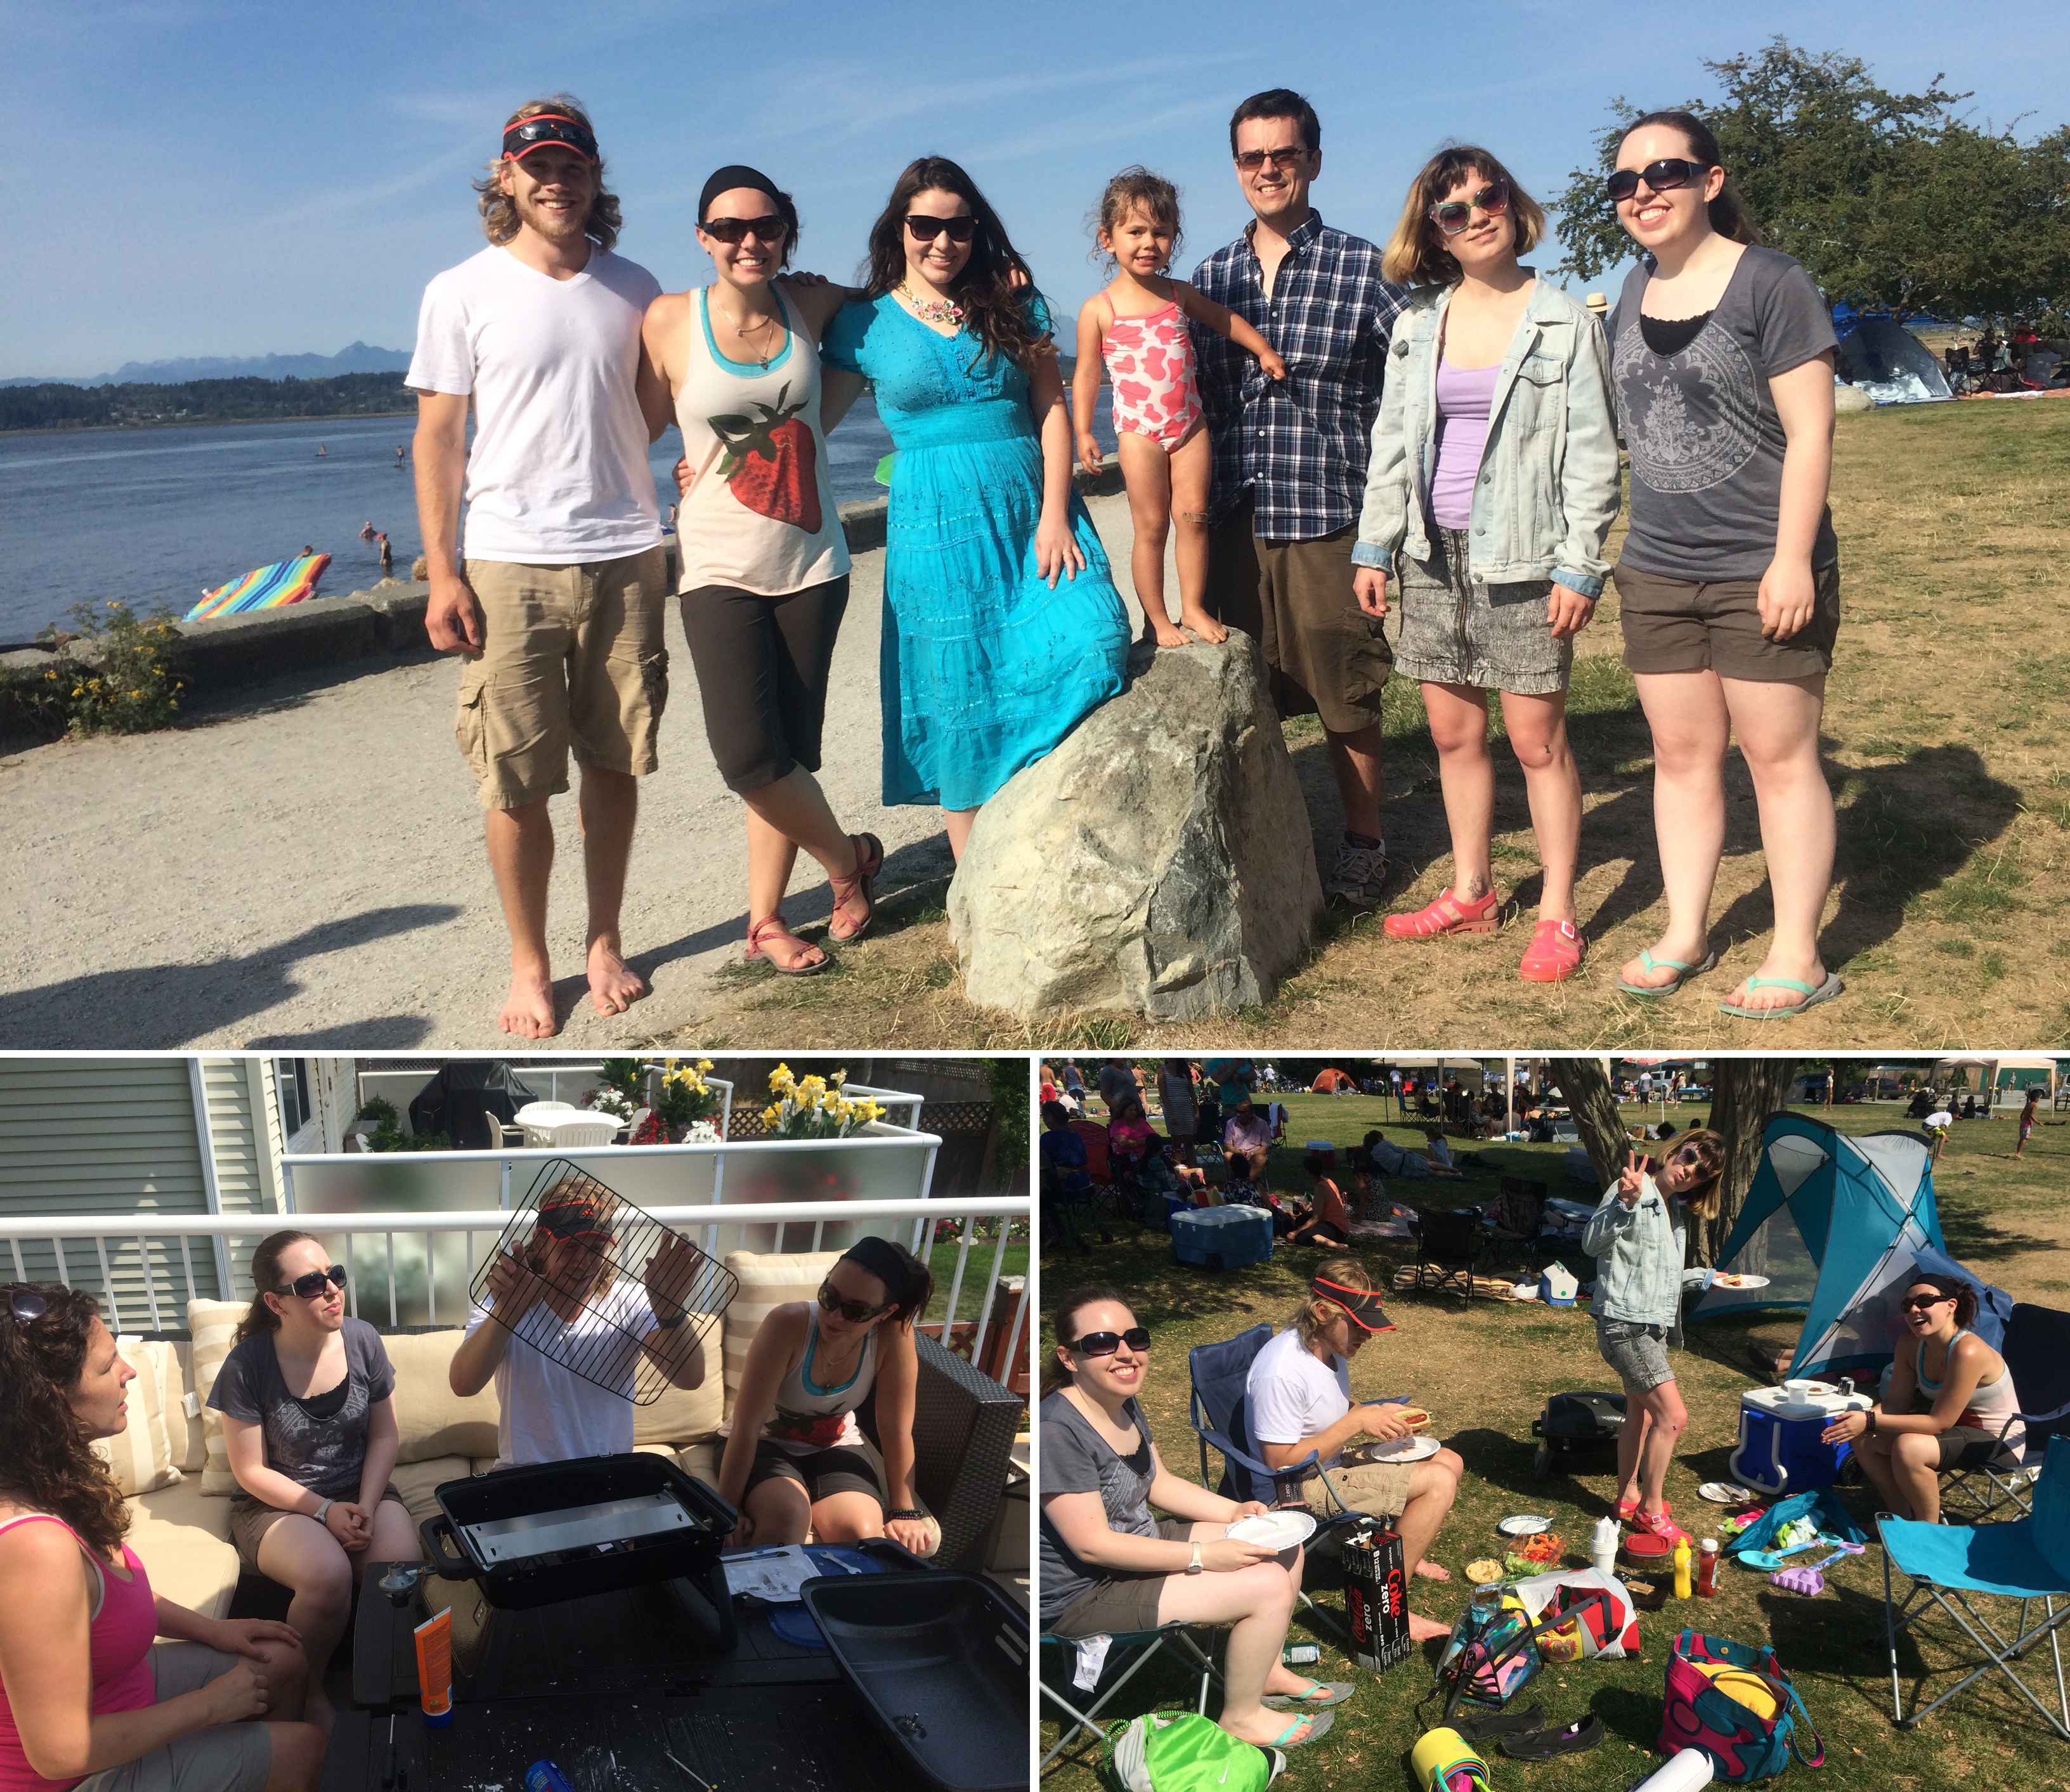 A group of students and a young child pose on the beach at the Rider Group BBQ in 2015